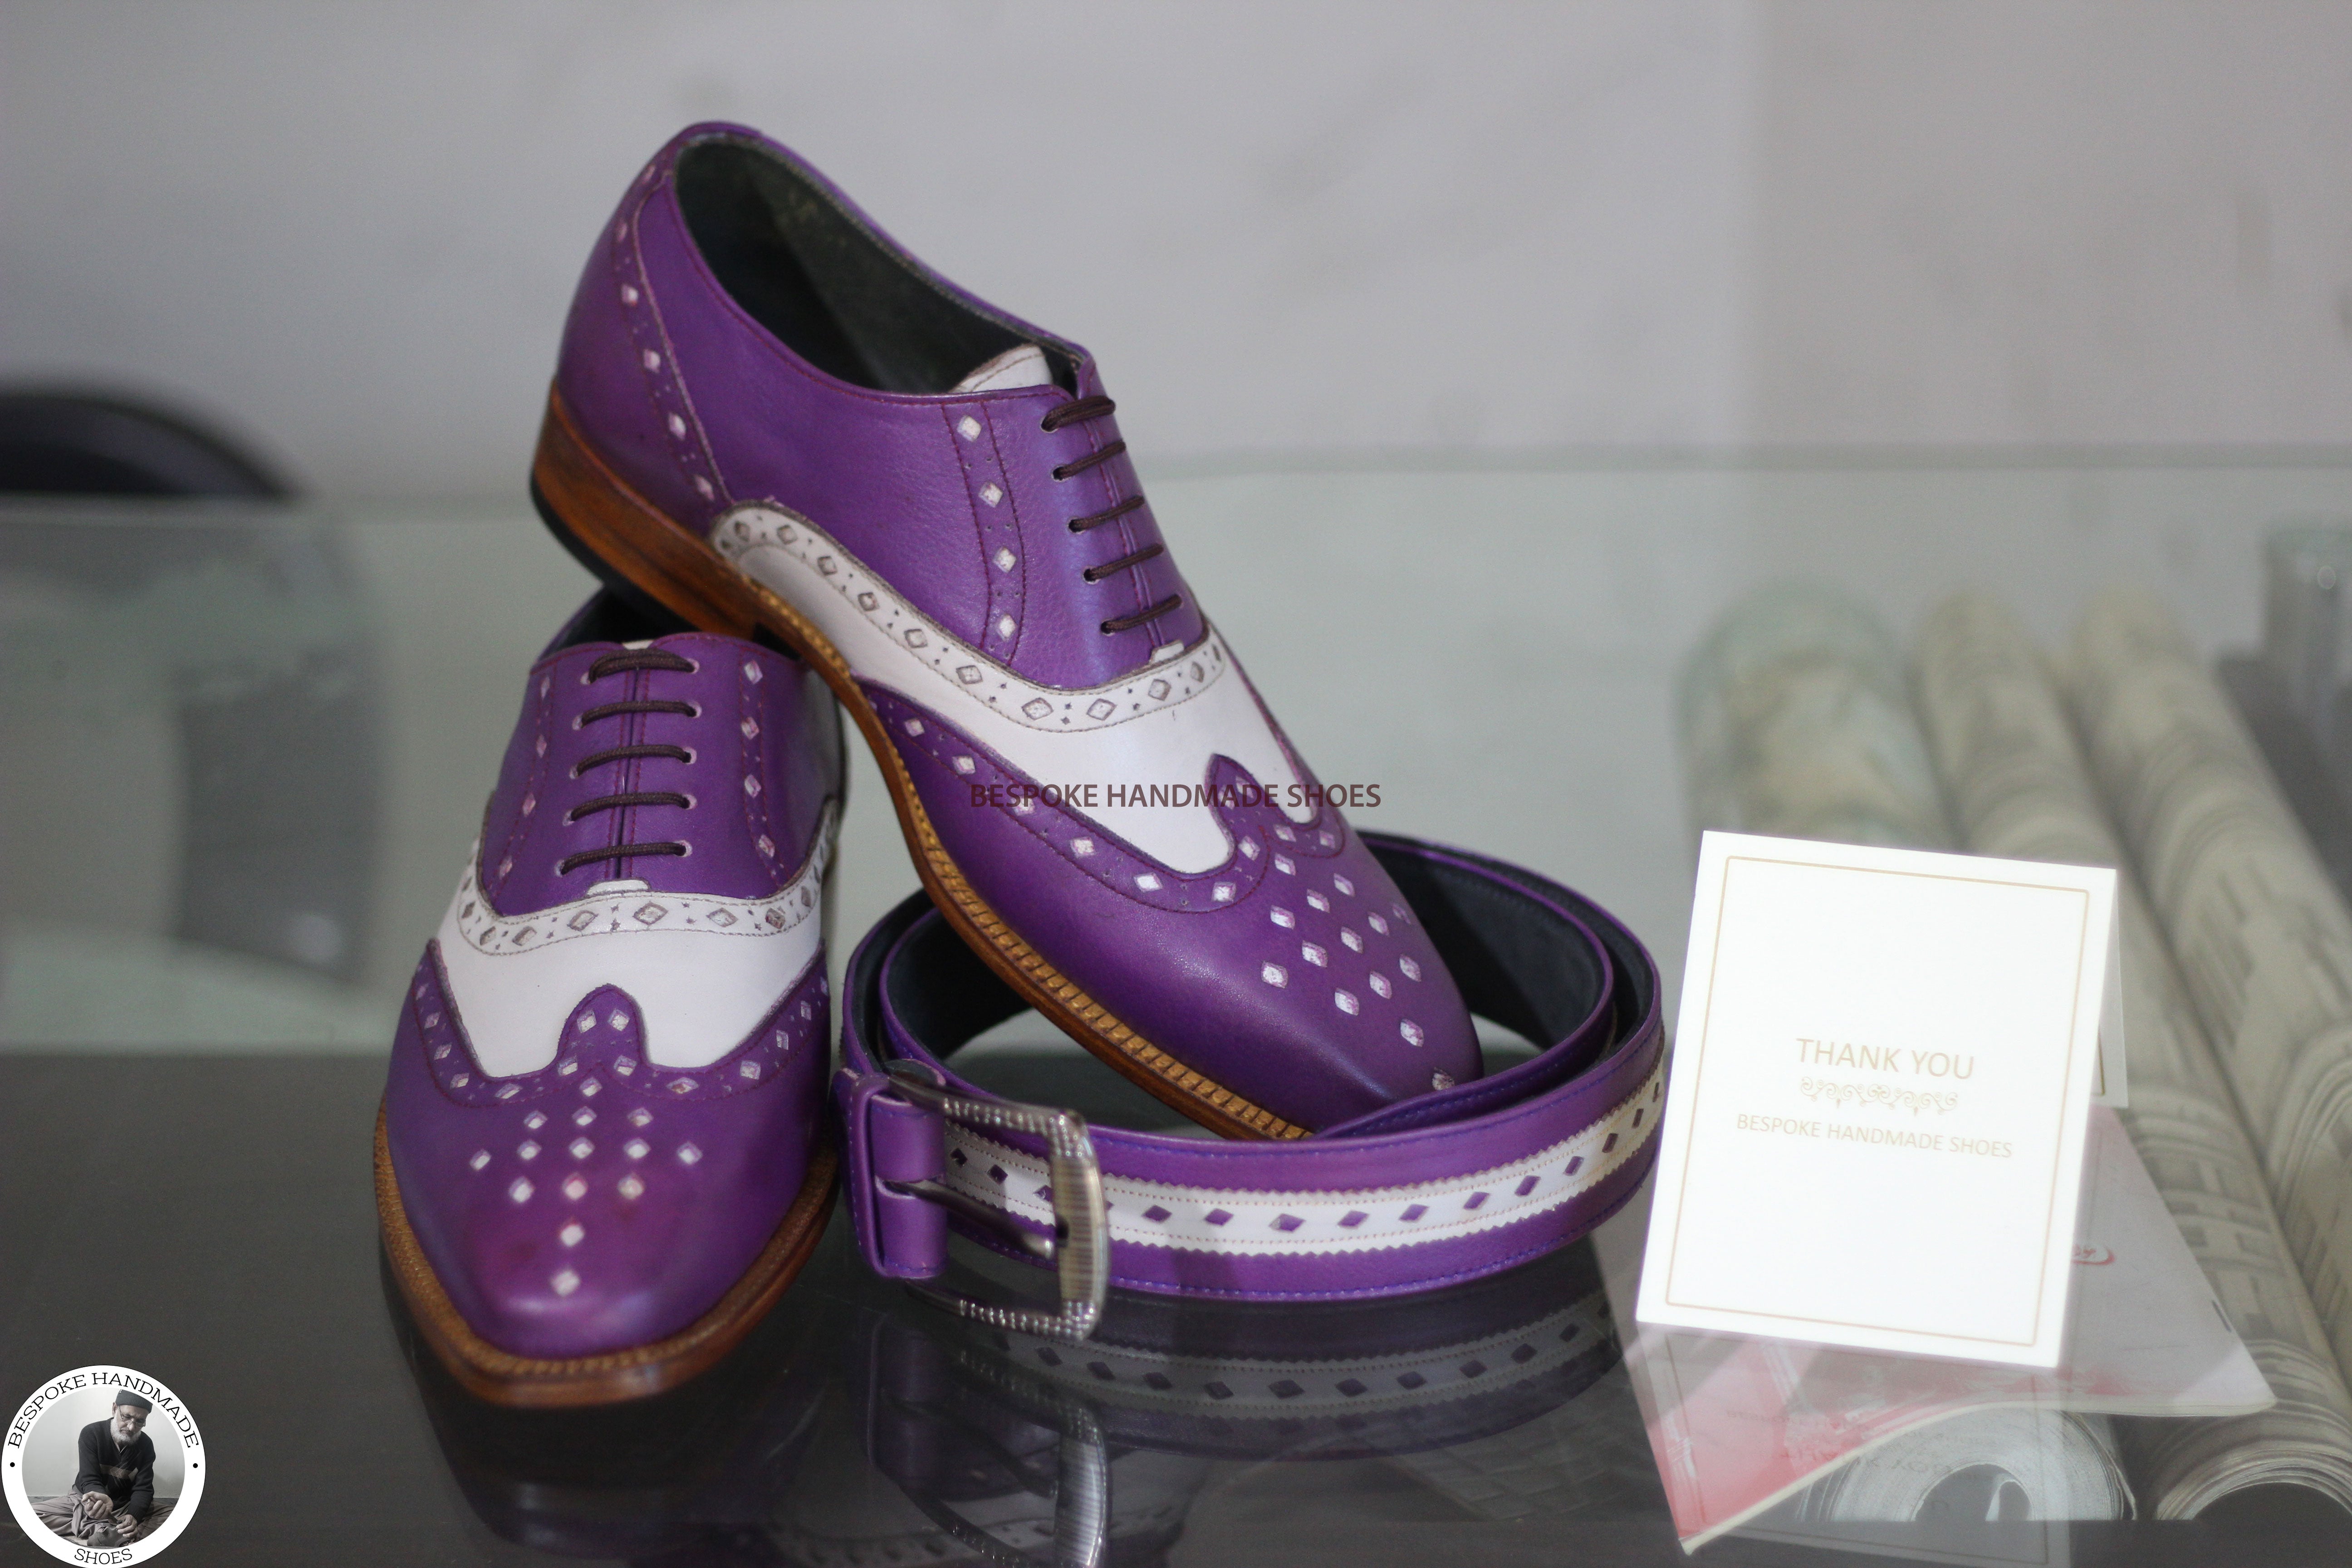 Bespoke Handmade Genuine Purple And White Pure Leather Brogue Wingtip Oxford Lace up Formal Shoes